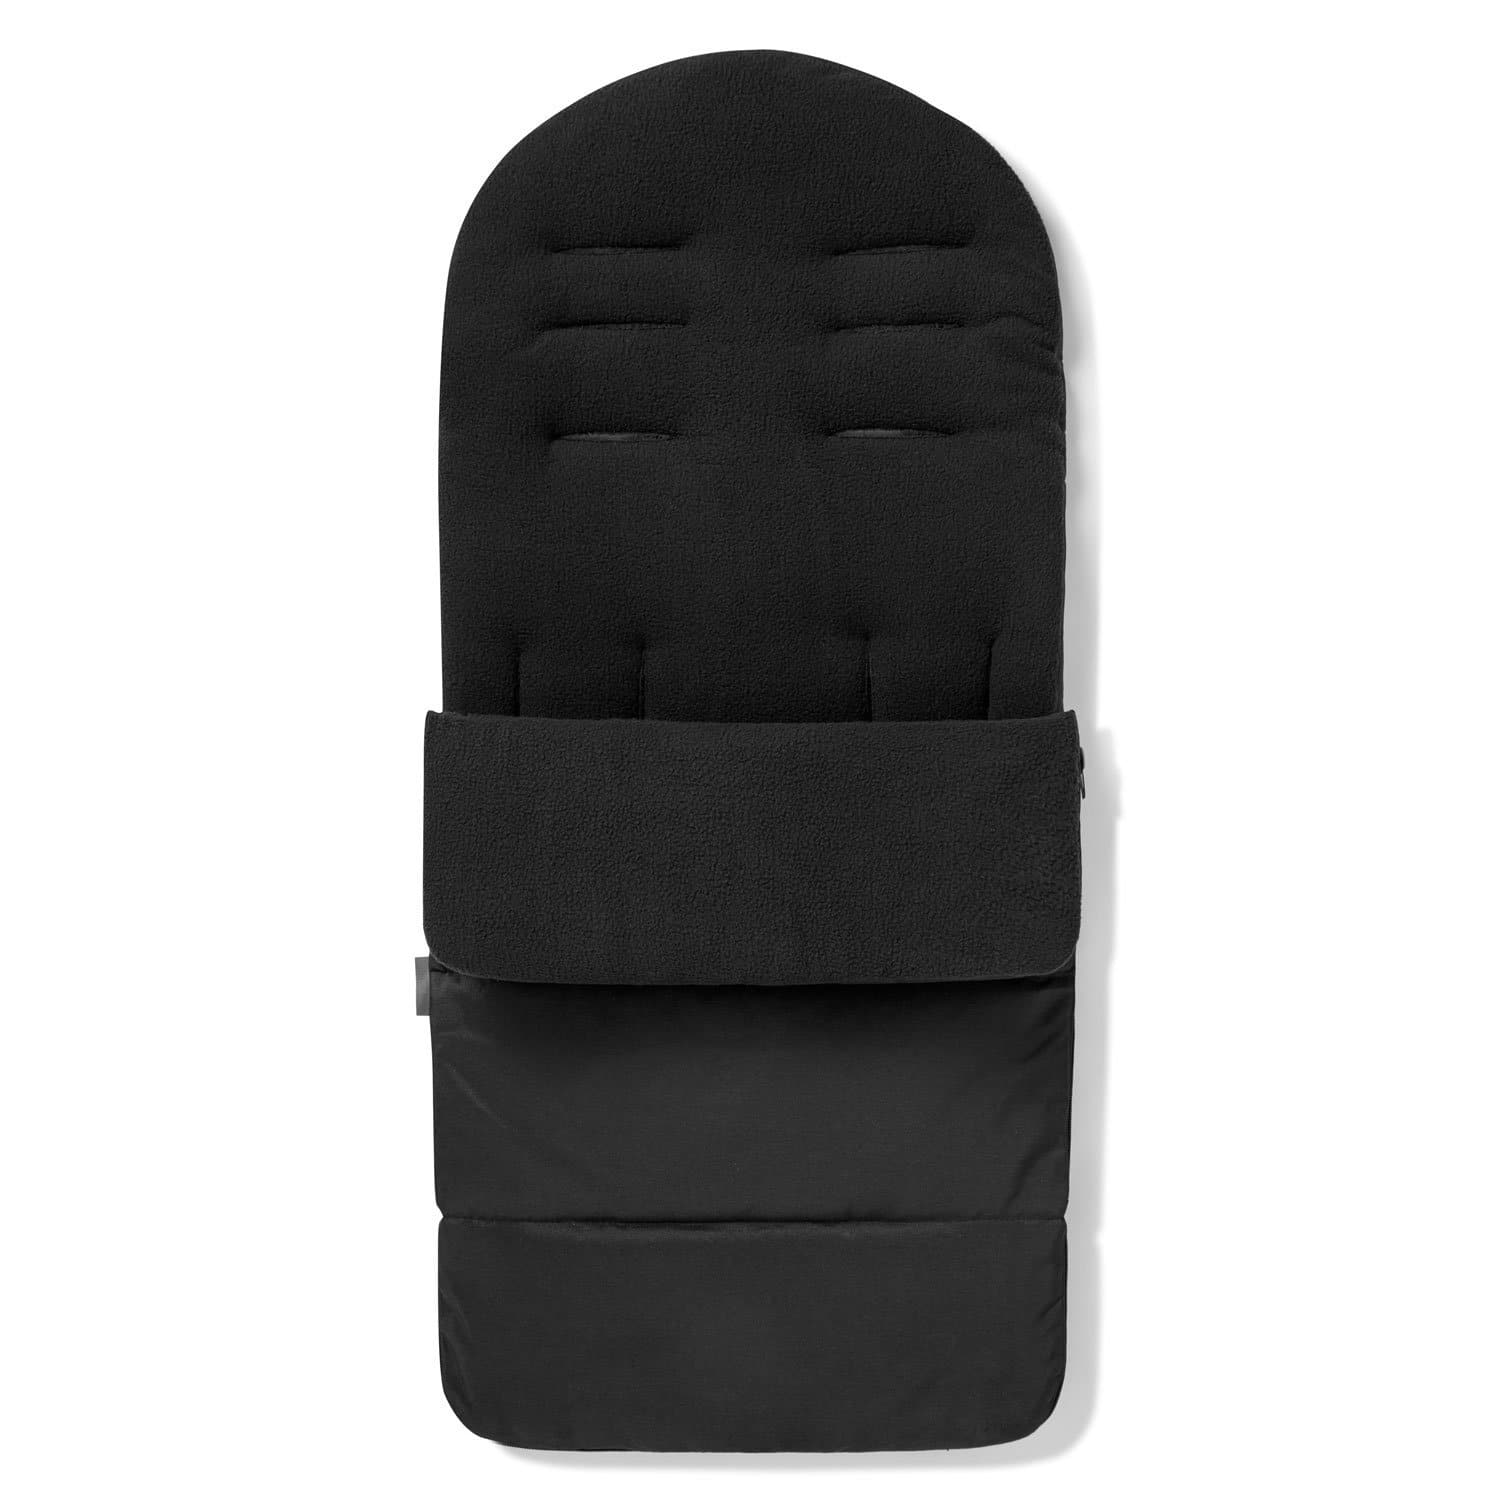 Premium Footmuff / Cosy Toes Compatible with Out 'n' About - Black Jack / Fits All Models | For Your Little One